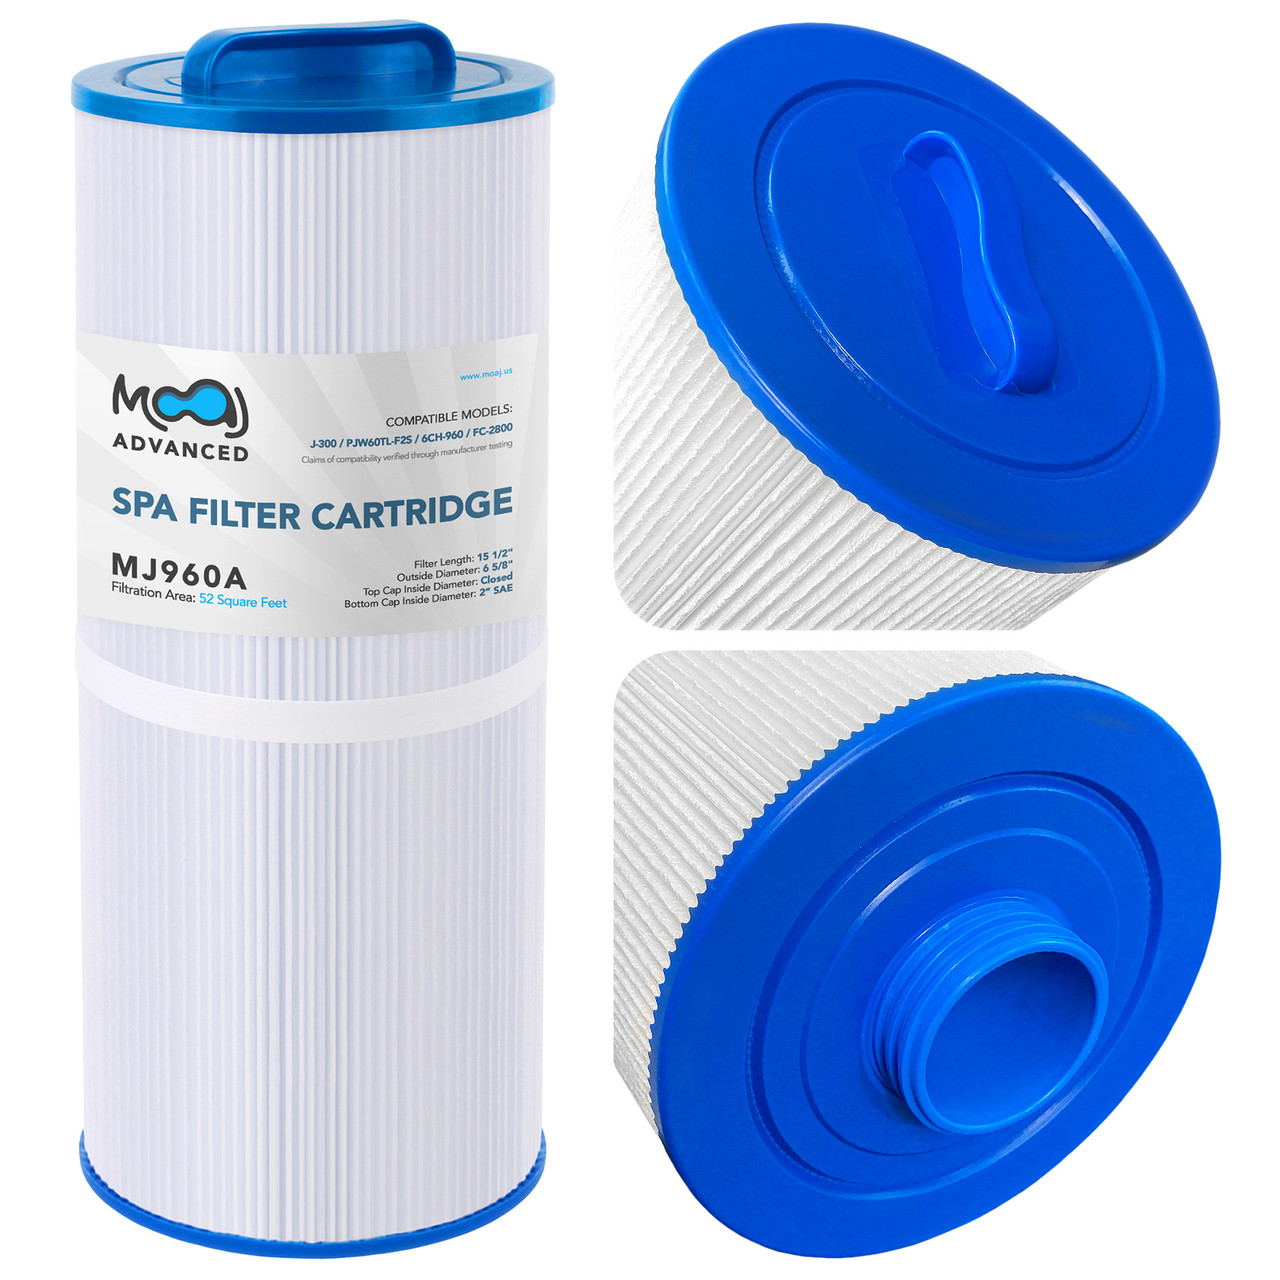 Jacuzzi J-435 Spa Filter Replacement - MJ960